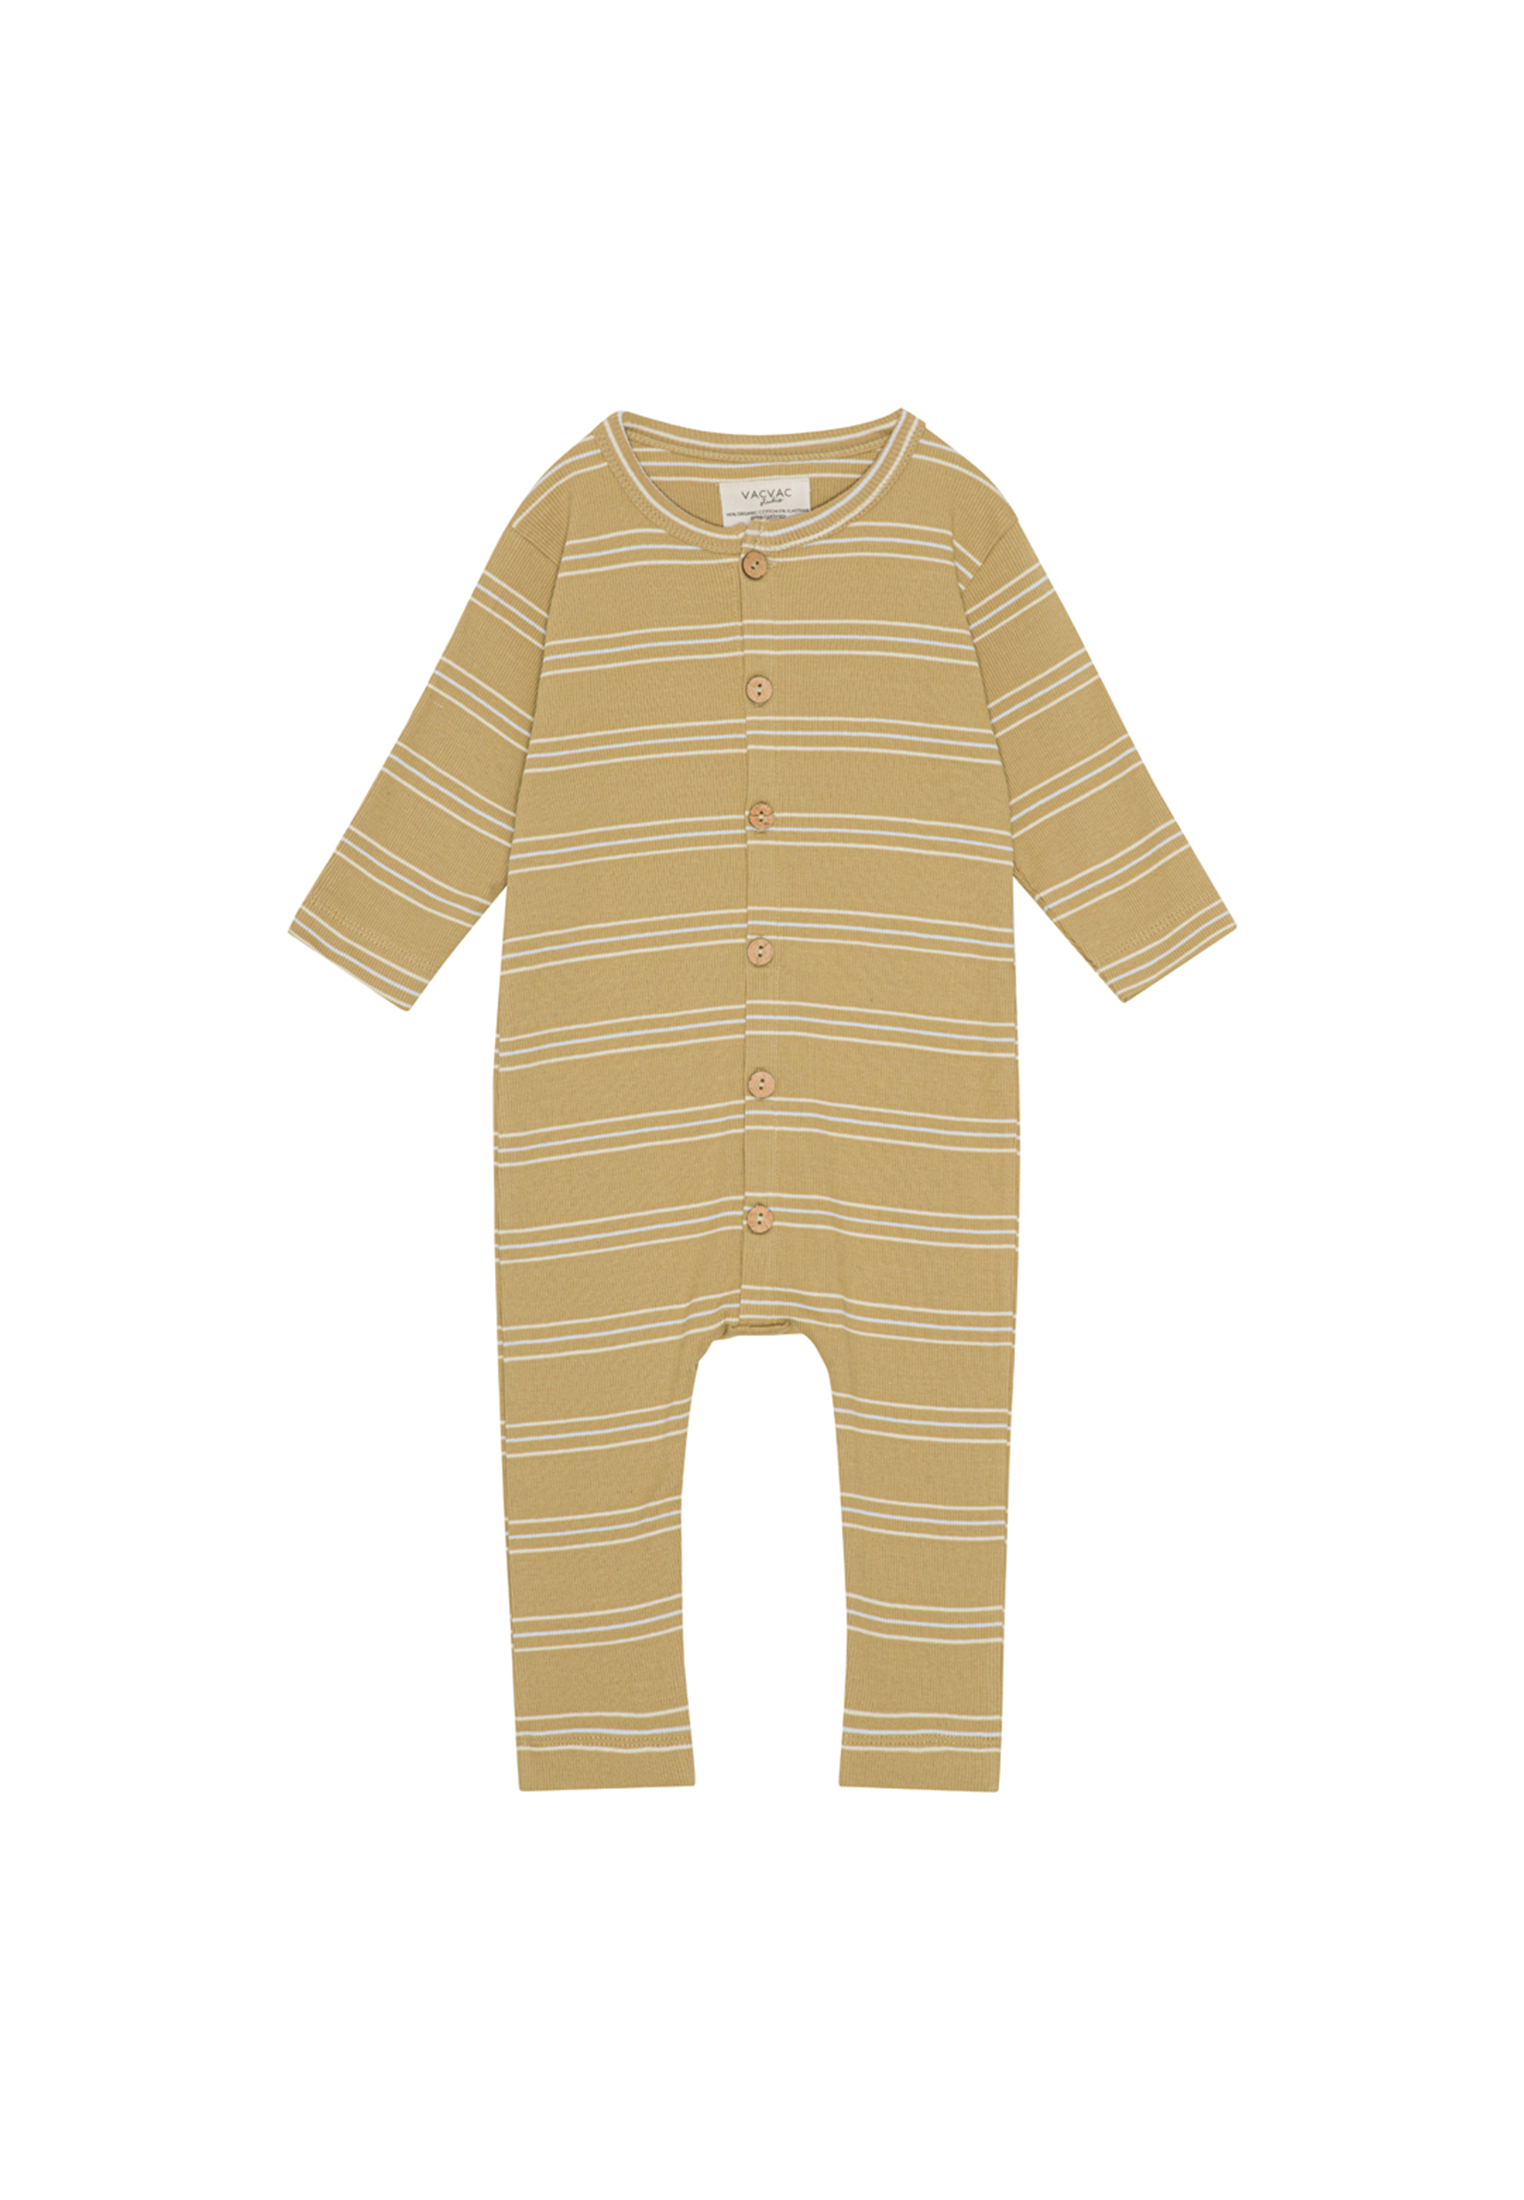 MAMA.LICIOUS Baby one-piece suit - 99999969